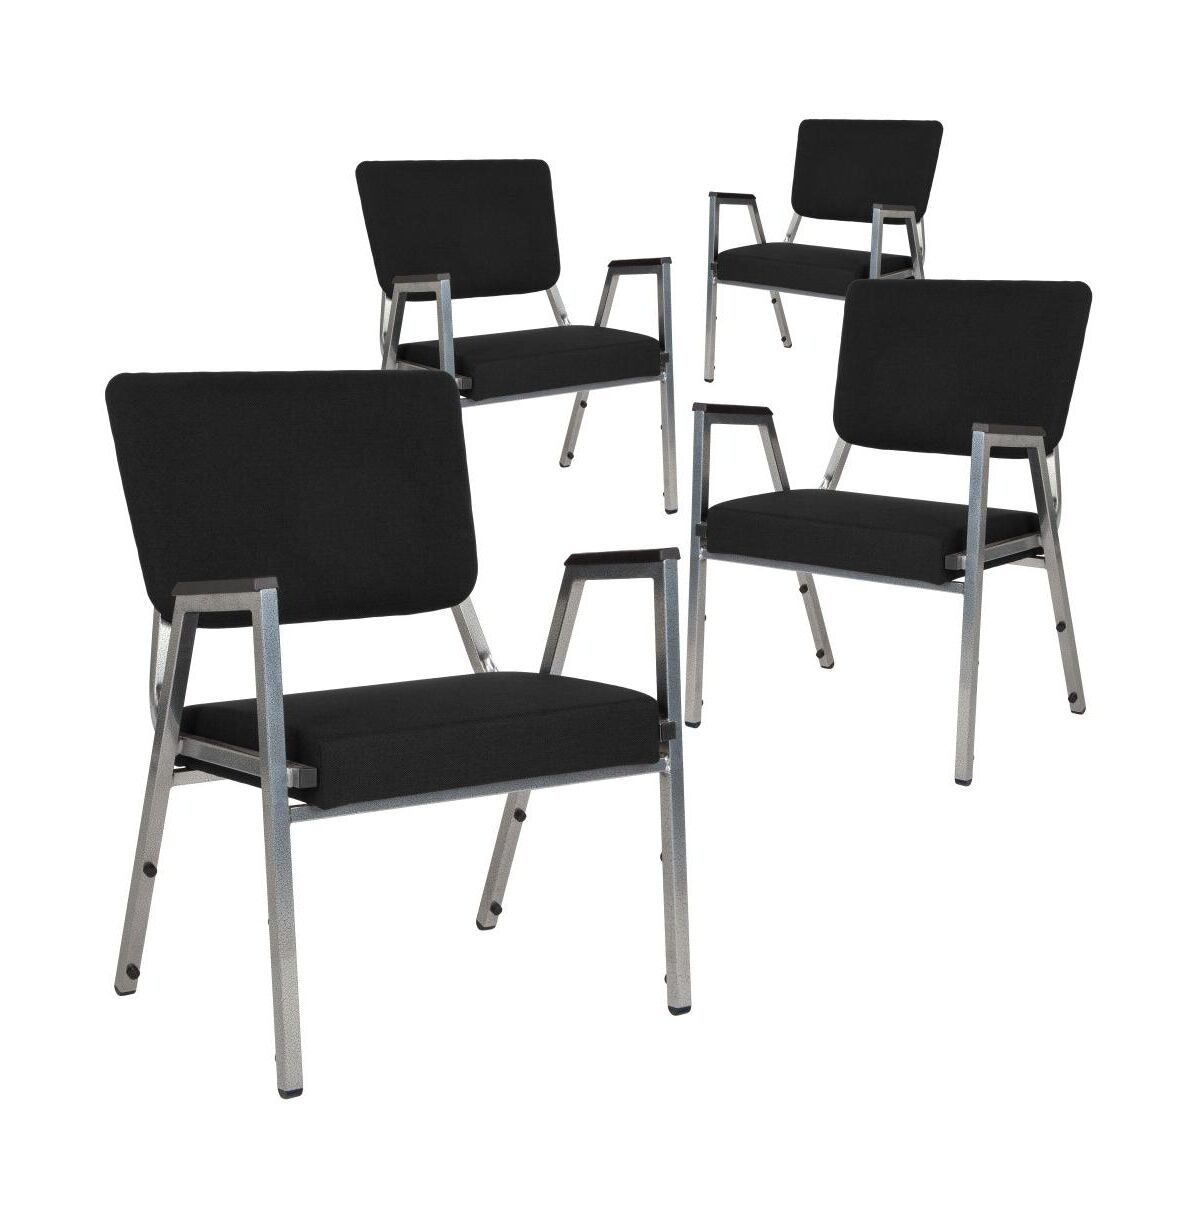 Emma+oliver 4 Pack 1000 Lb. Rated Antimicrobial Bariatric Medical Reception Arm Chair With Panel Back - Black fabric